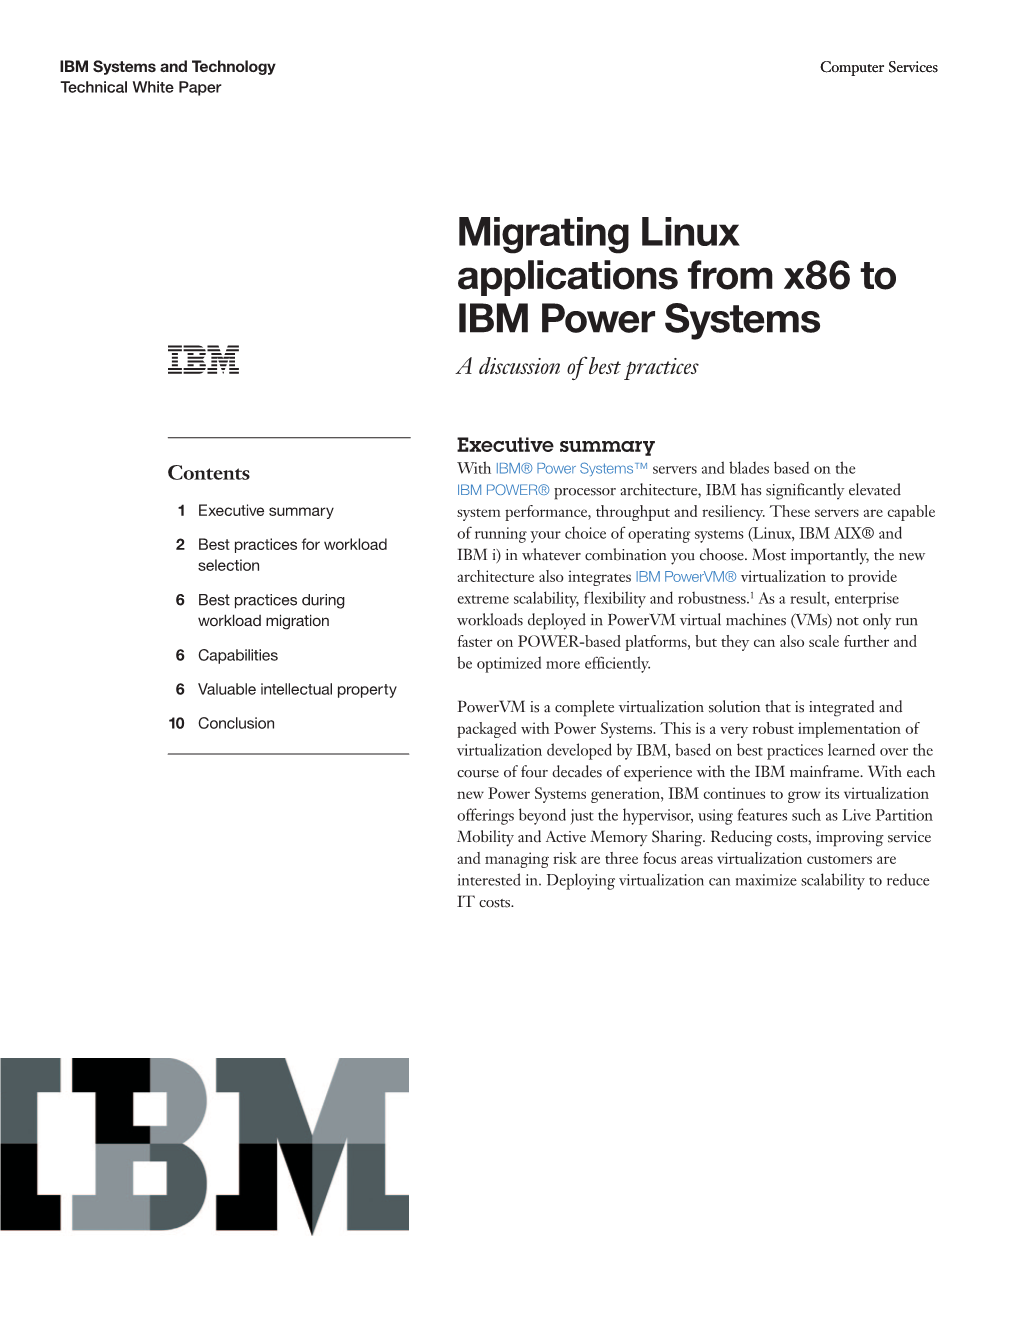 Migrating Linux Applications from X86 to IBM Power Systems a Discussion of Best Practices